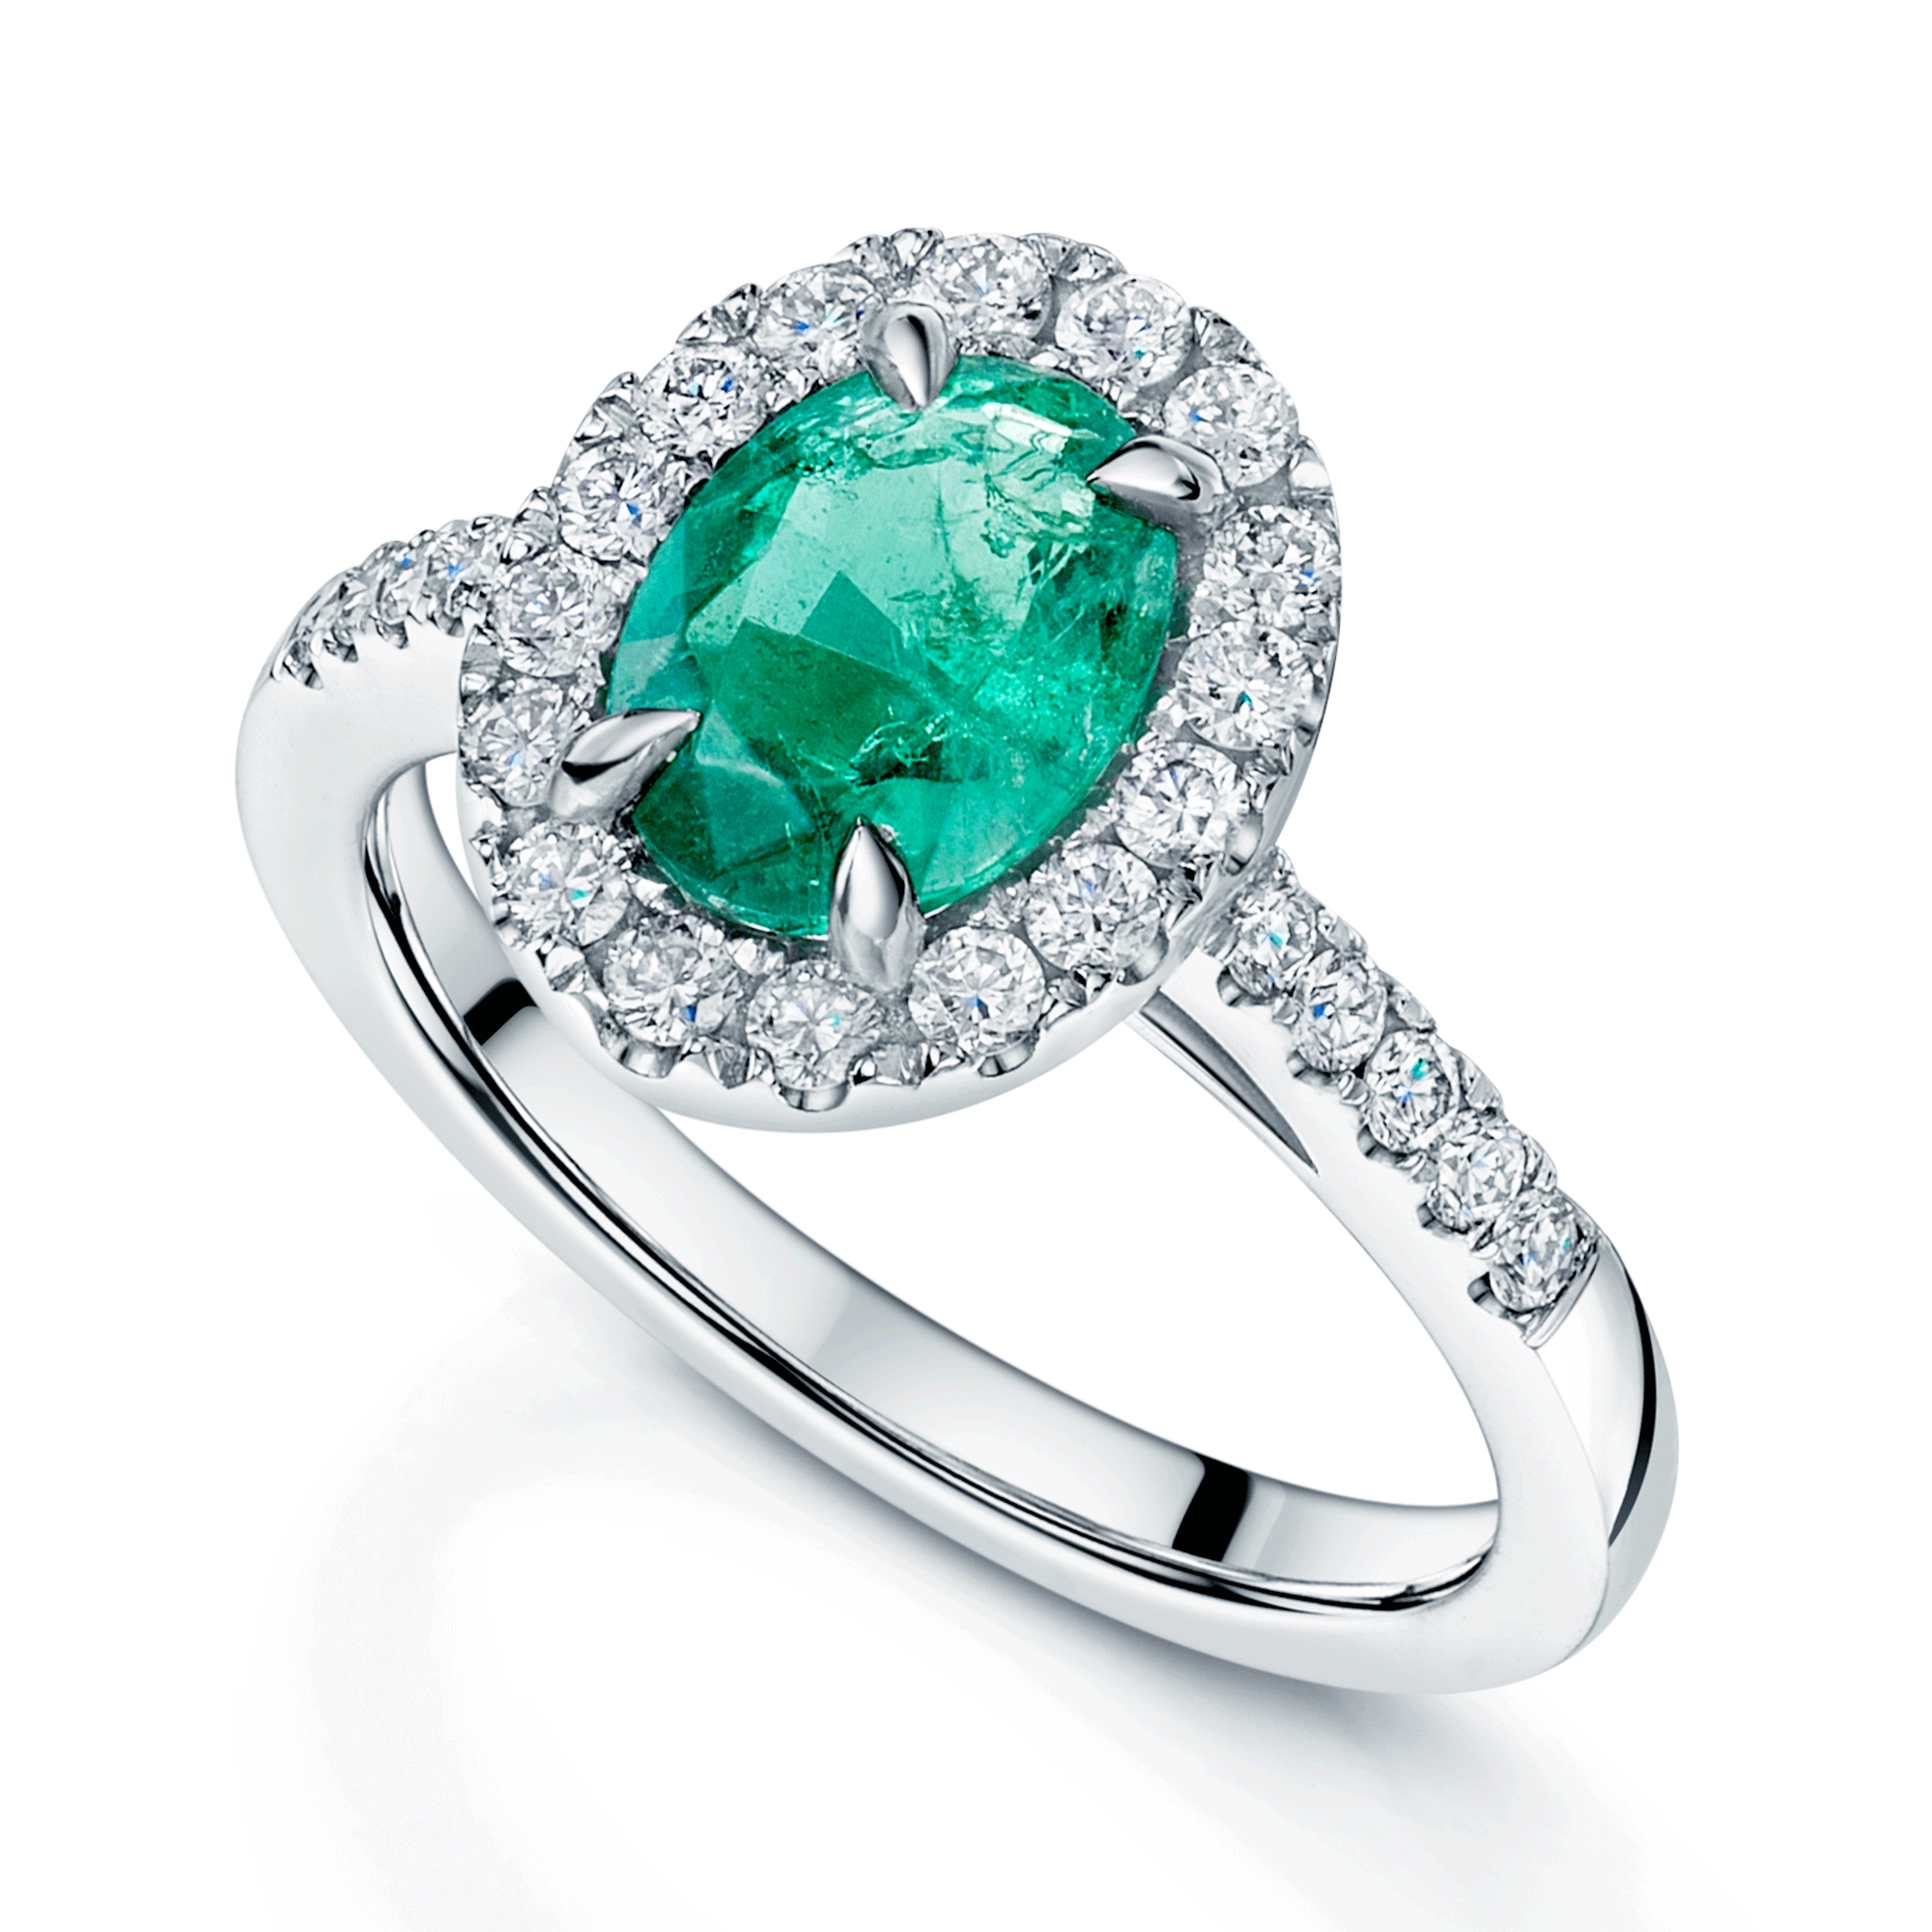 Platinum Oval Cut Emerald And Dimond Ring With Diamond Shoulders